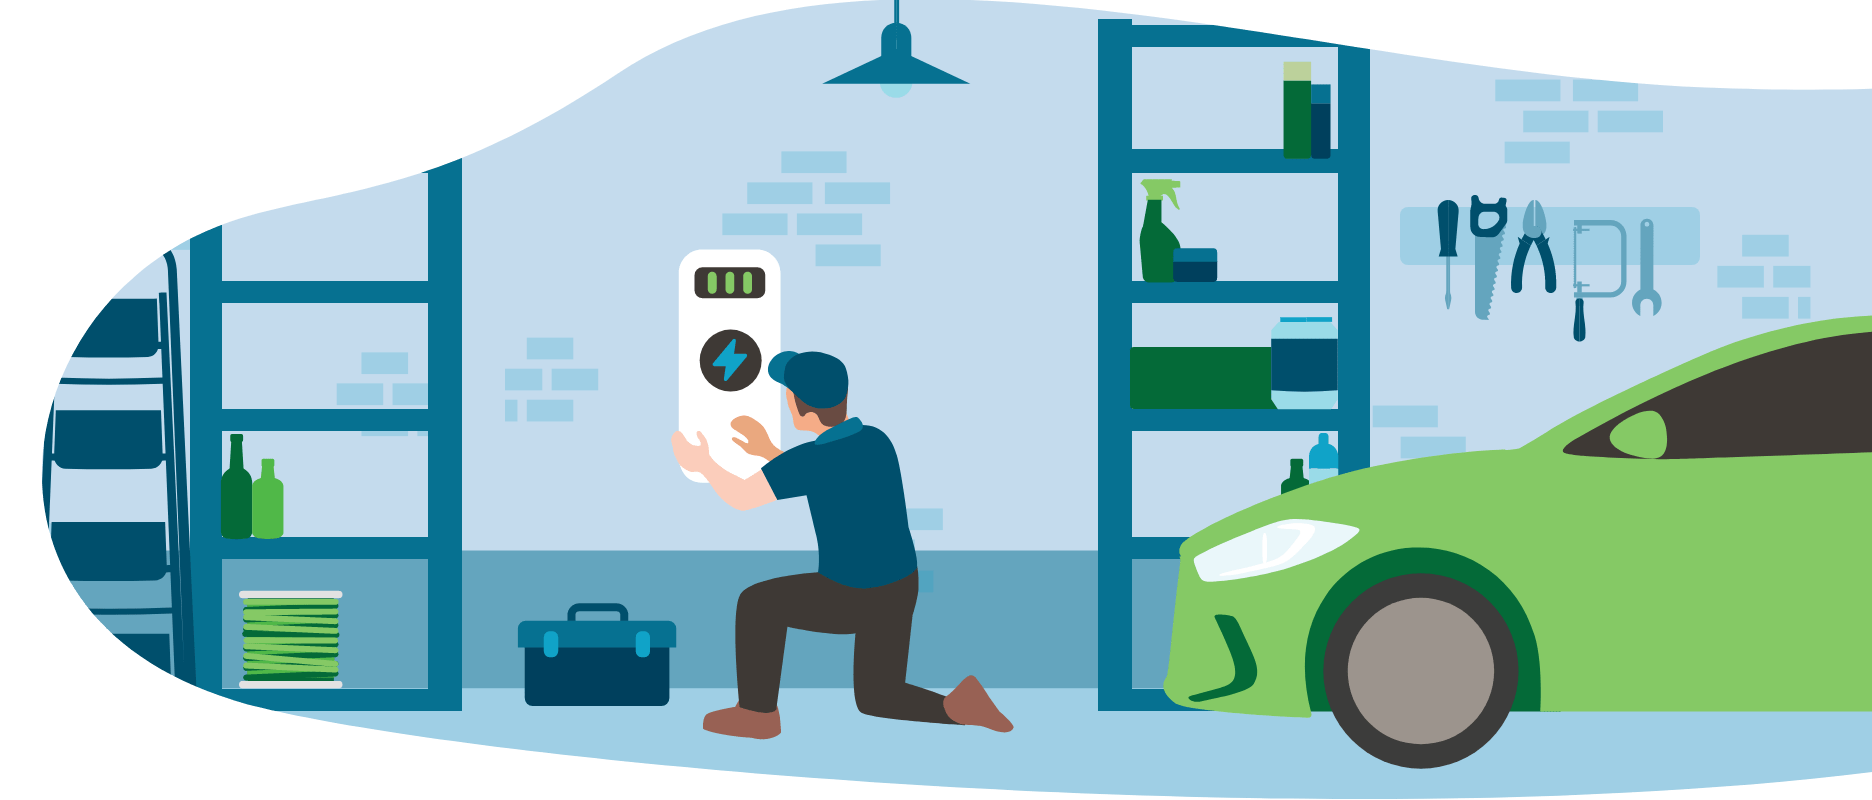 how-to-install-a-home-ev-charger-checklist-bc-hydro